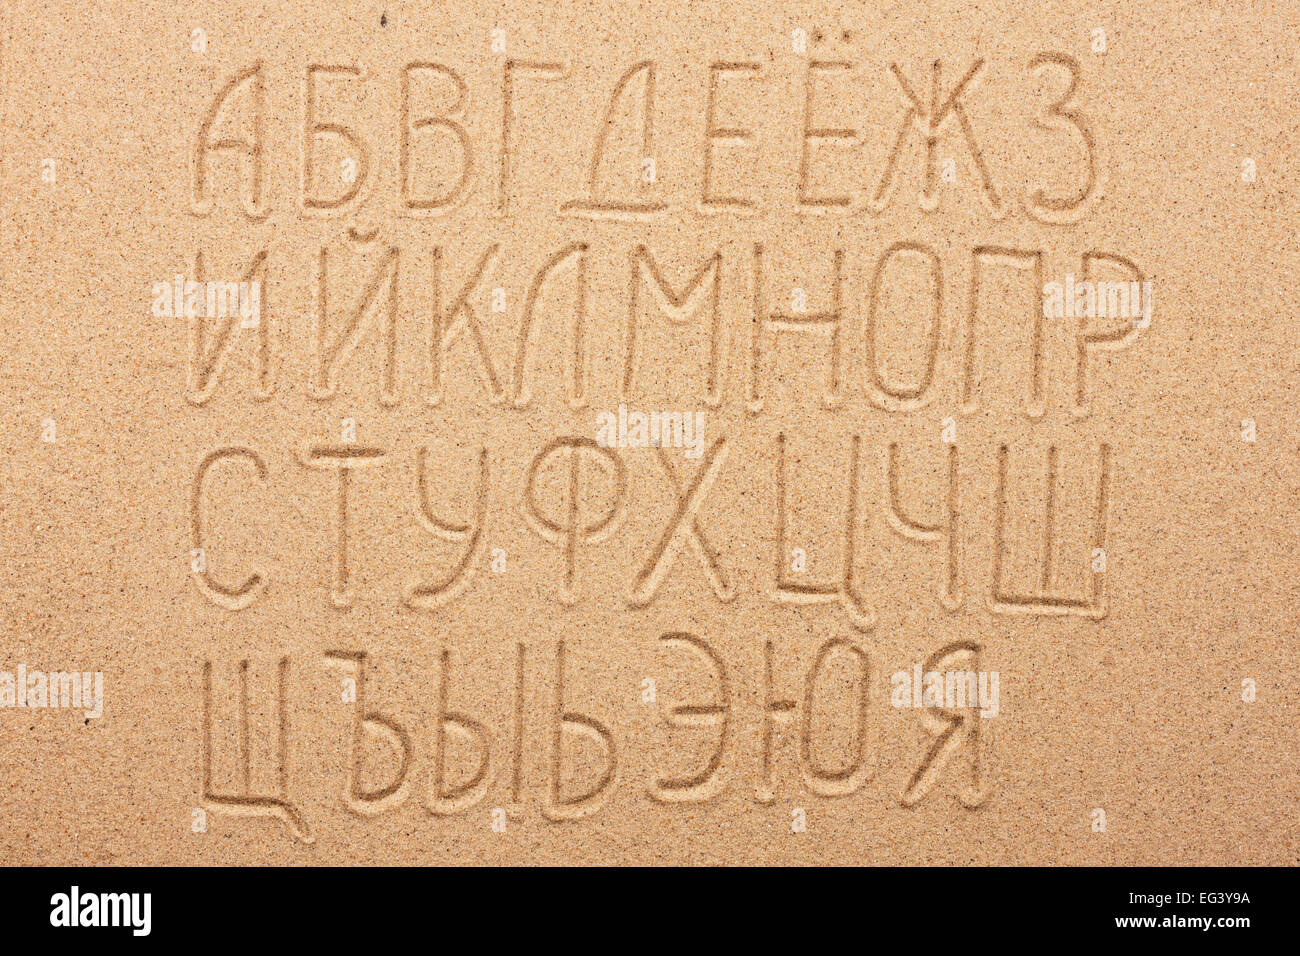 Russian alphabet  written on the sand, as background Stock Photo